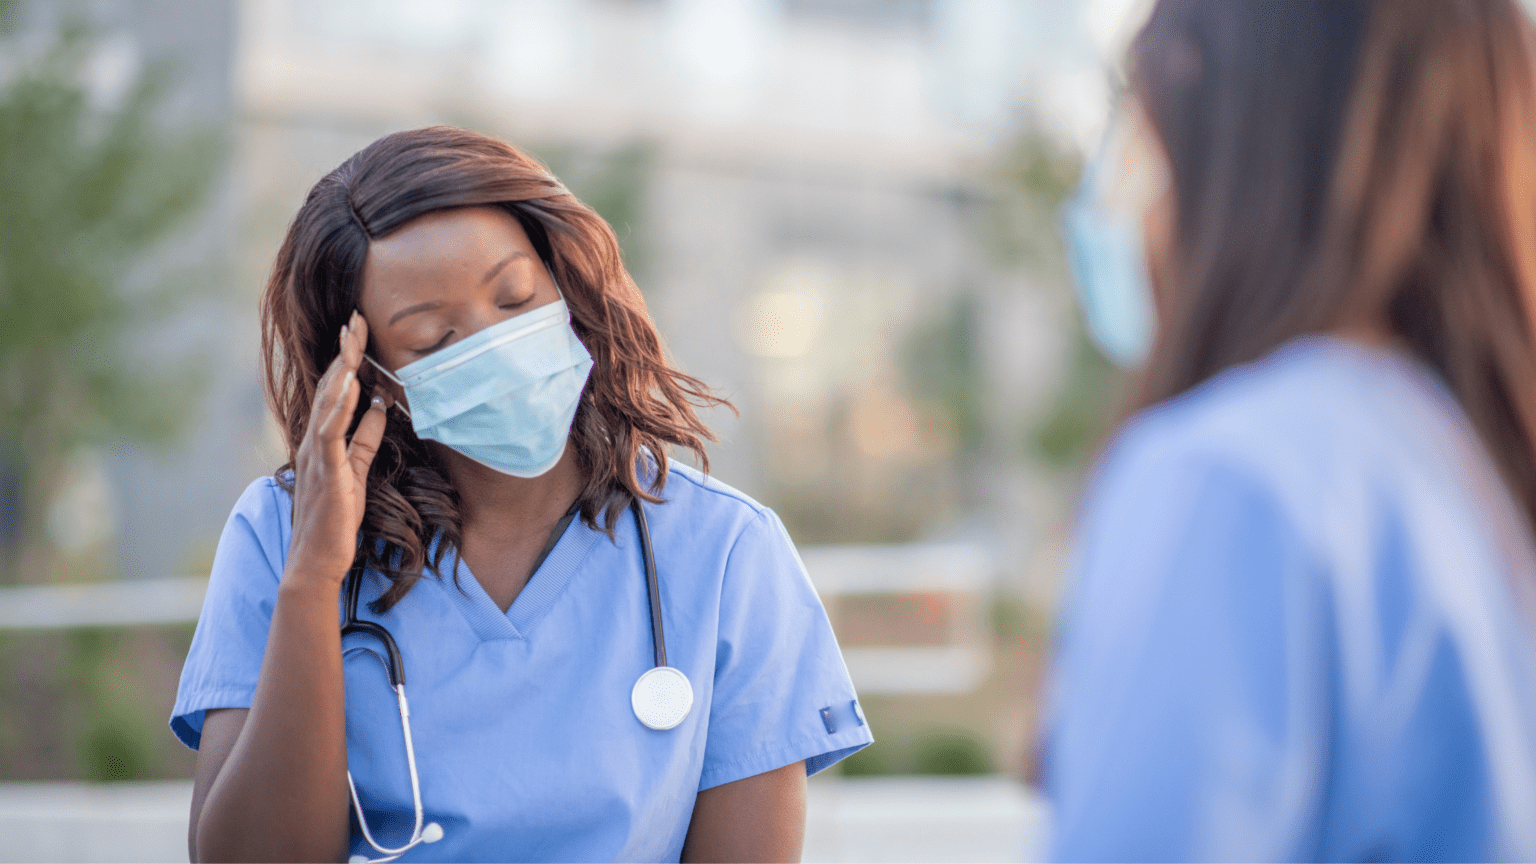 Blog Header for Physician Health & Wellness in the Era of COVID-19: Practicing Wellness in the Midst of the COVID-19 Pandemic